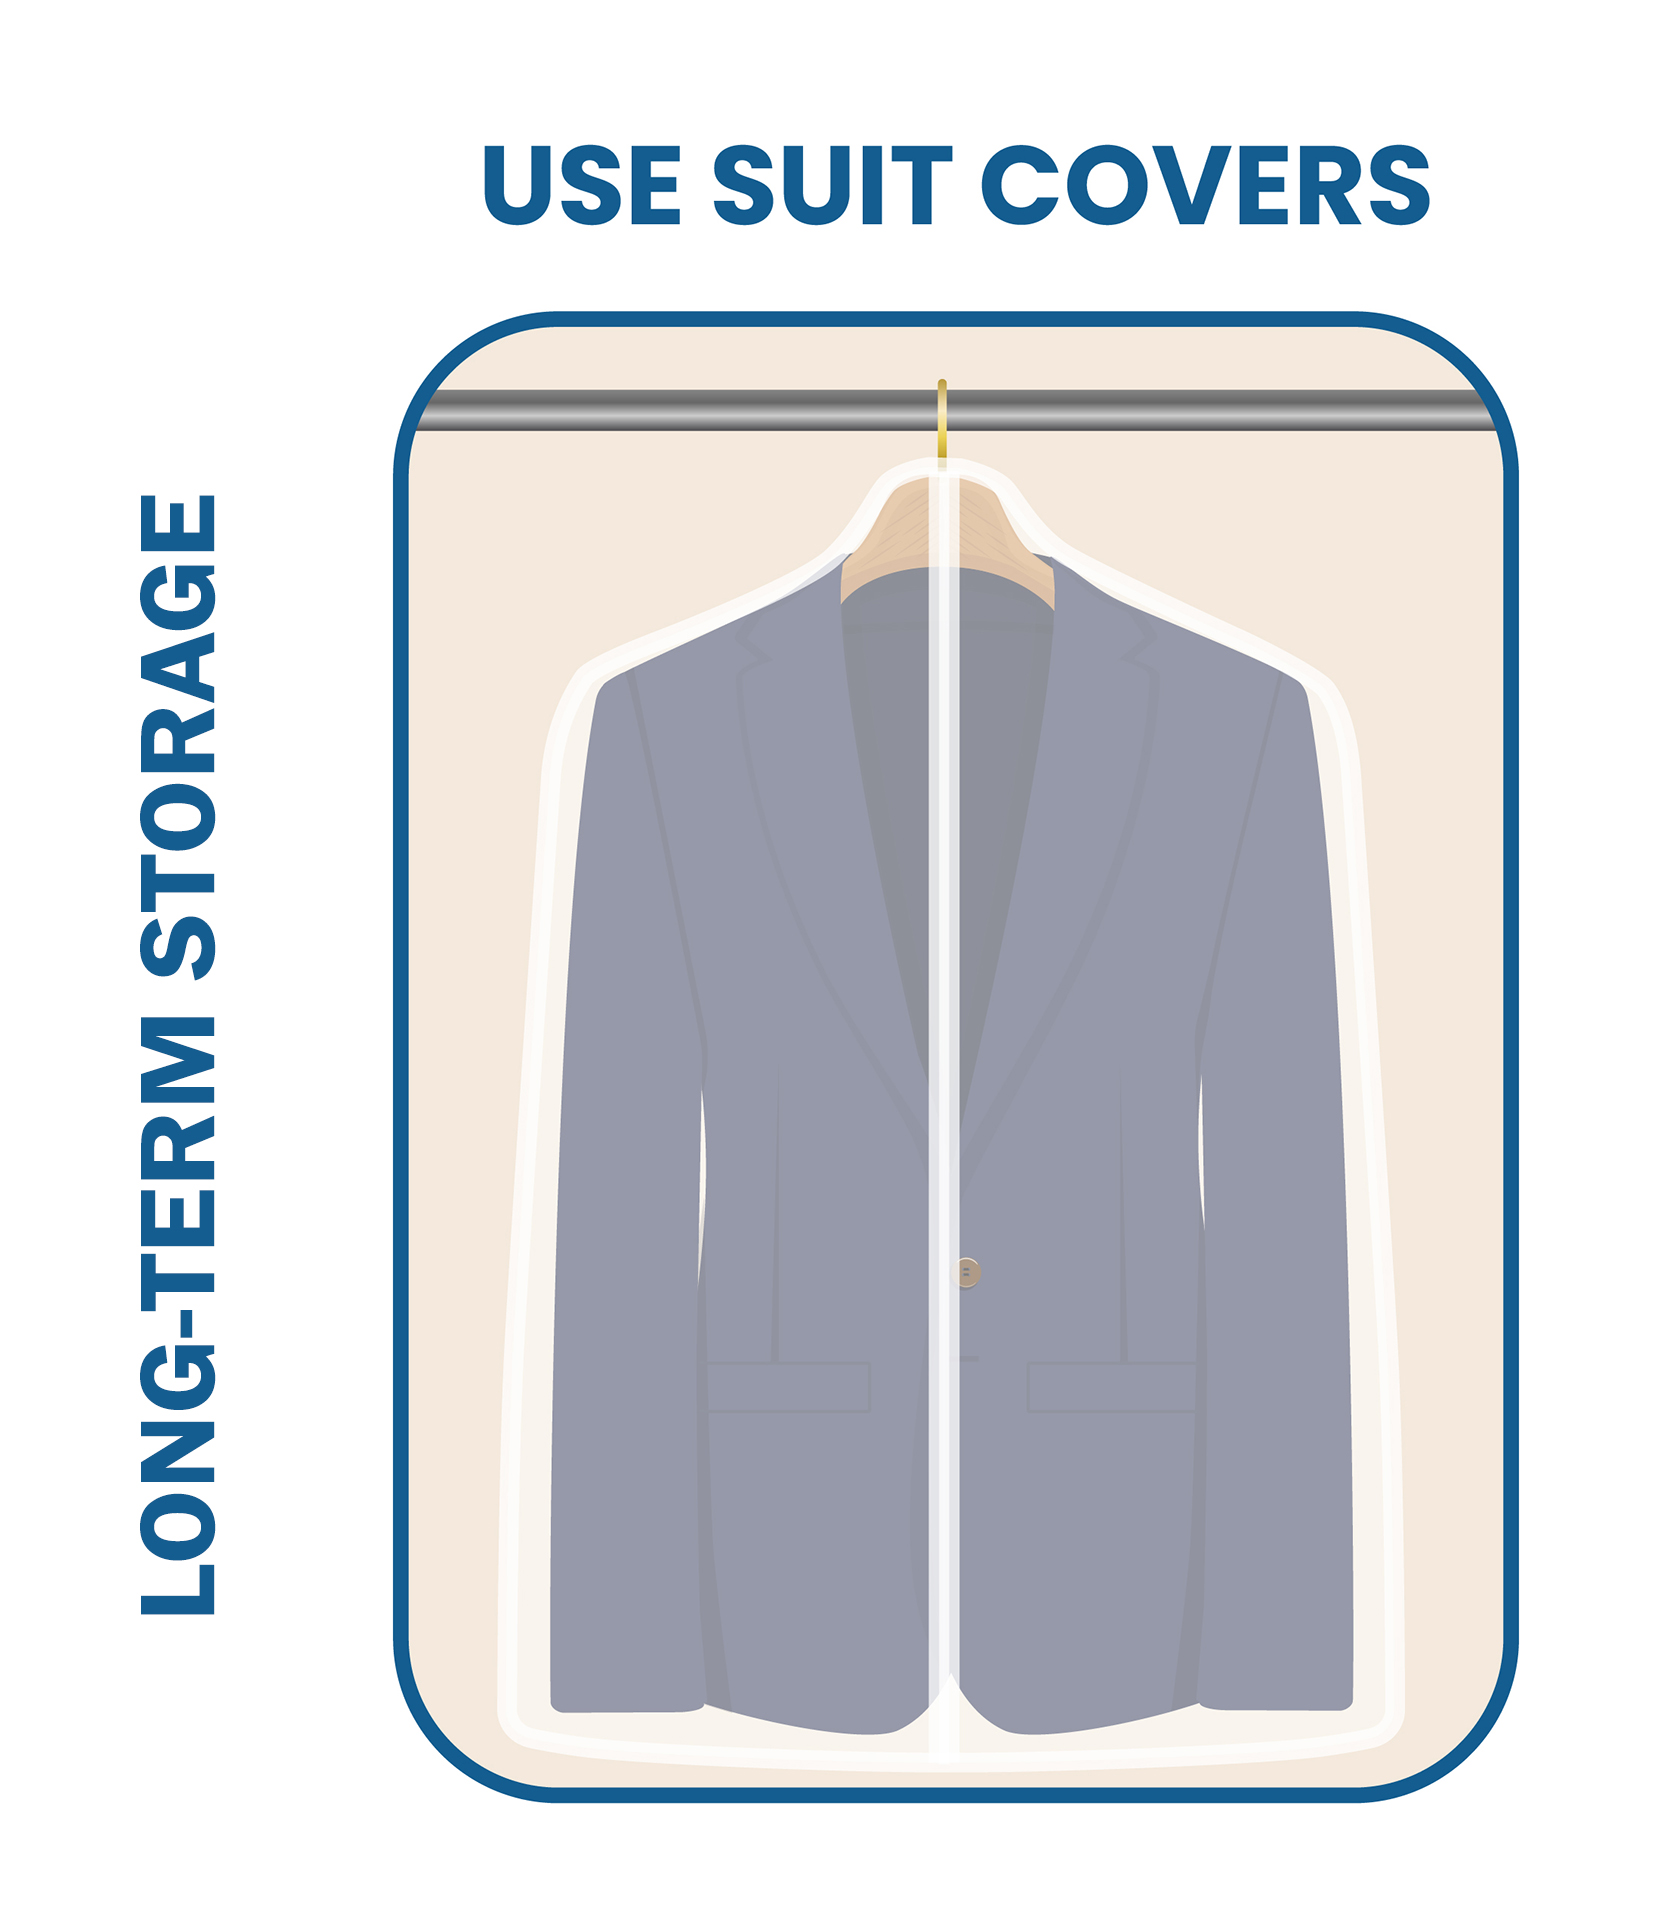 Use high-quality suit cover or garment bag